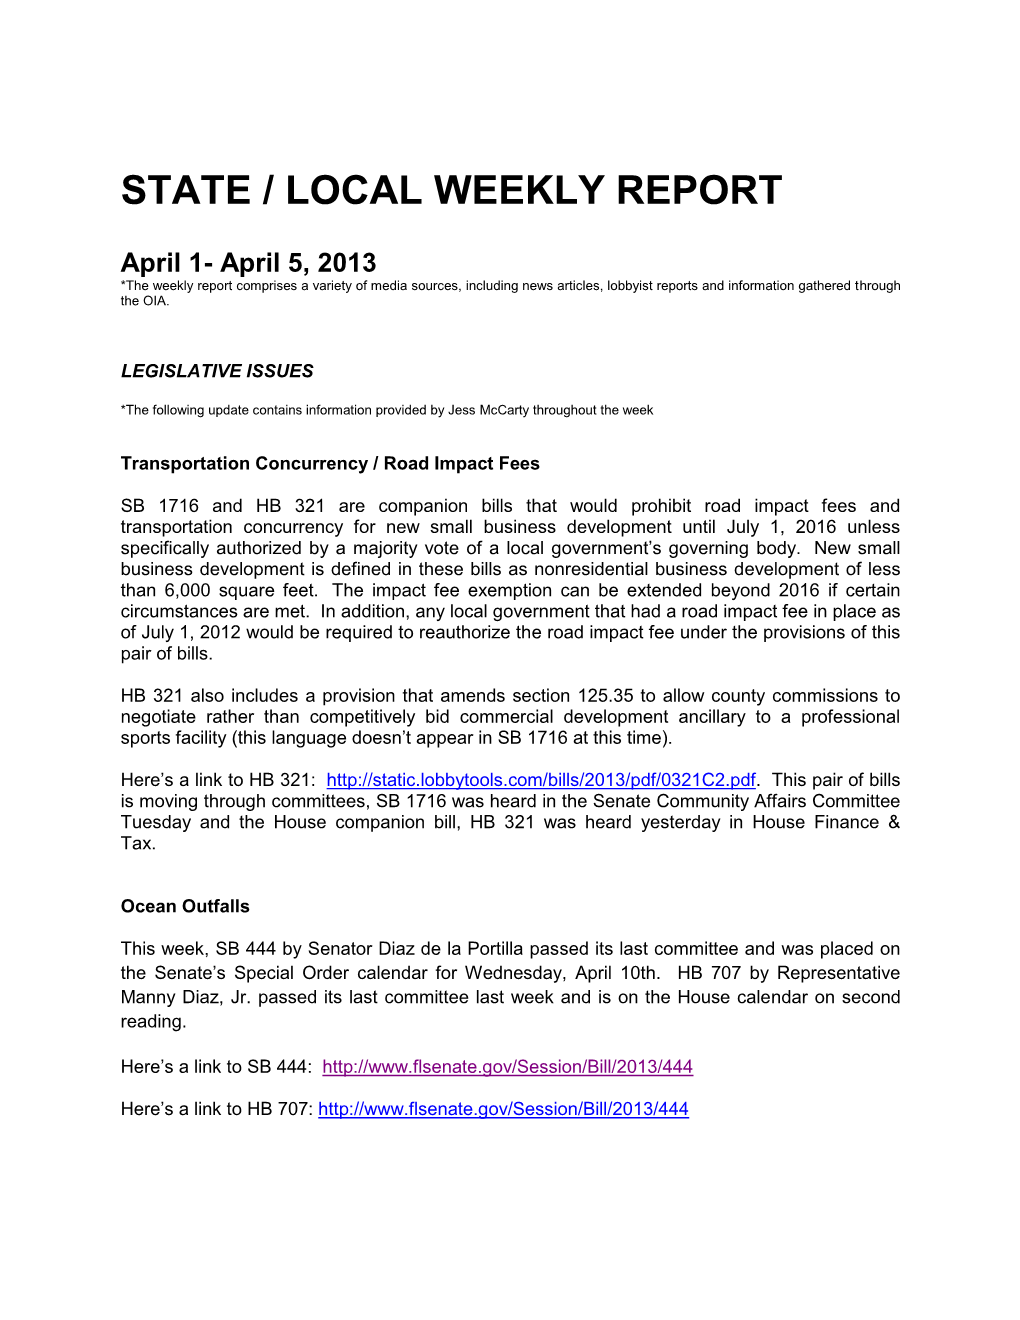 State / Local Weekly Report